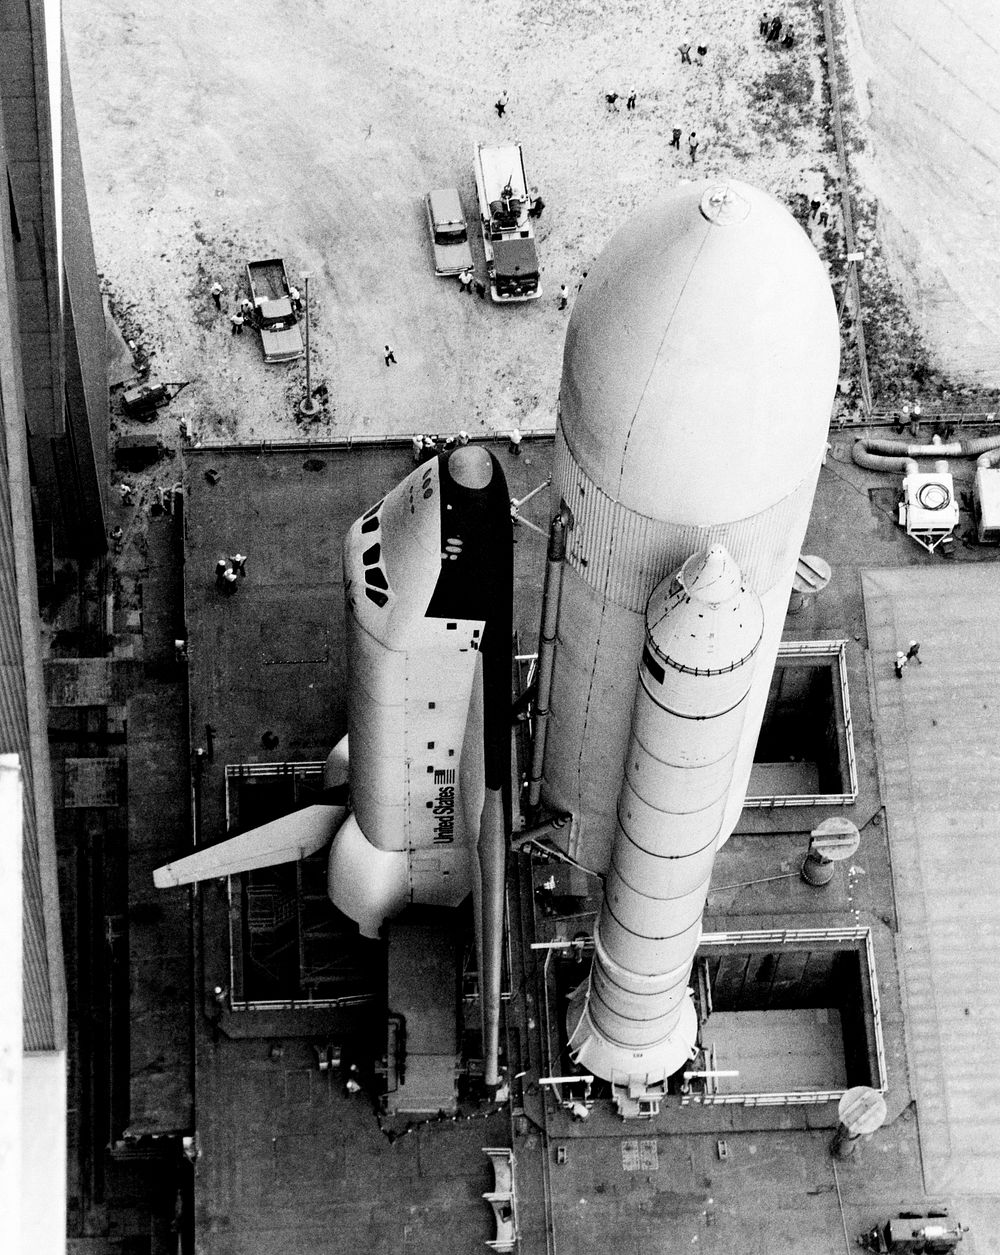 Space shuttle orbiter 101 Enterprise makes its first appearance as it is slowly rolled out the front door of the huge…